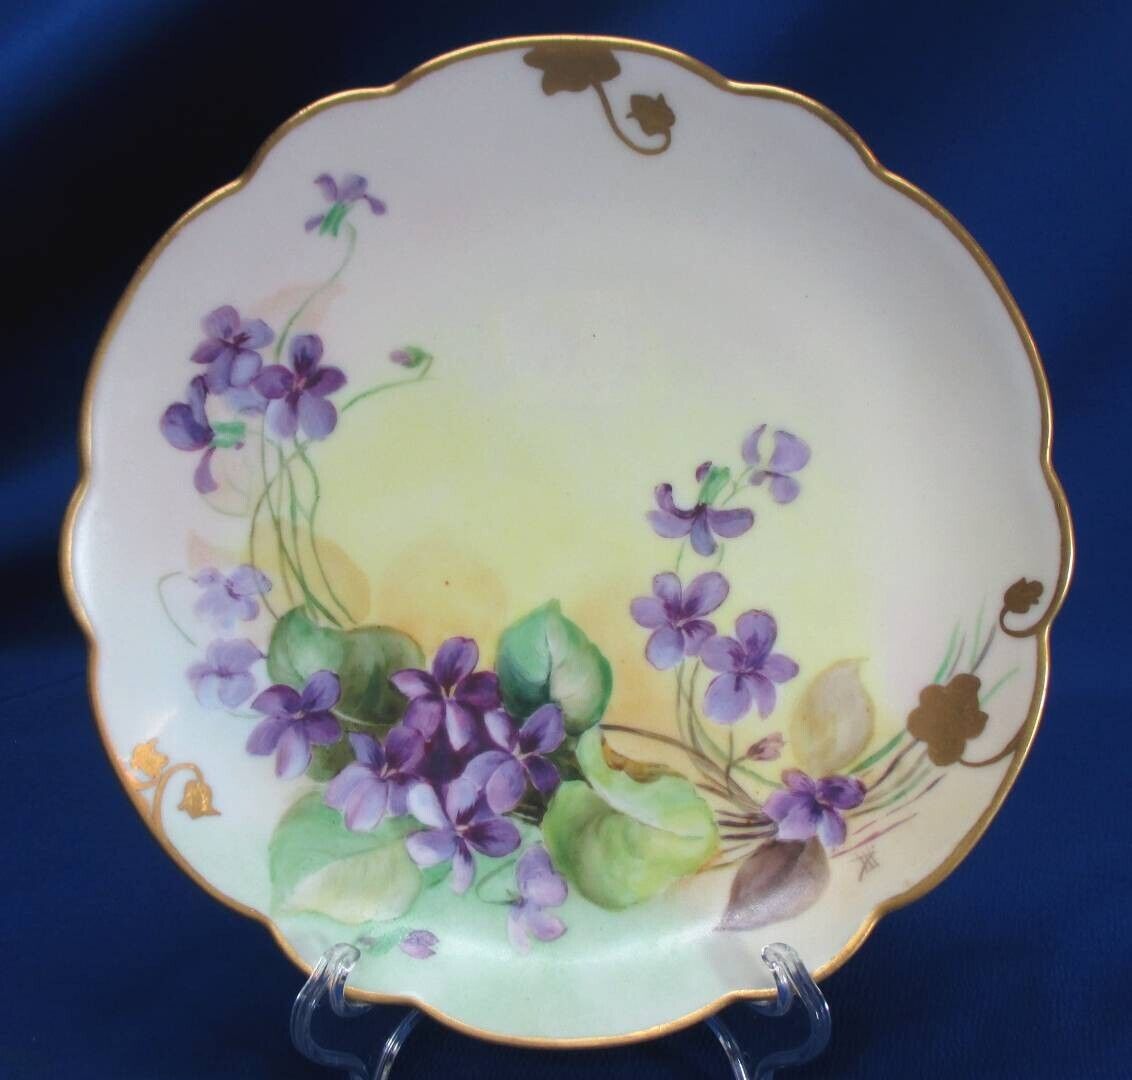 HAND-PAINTED VIOLETS PICKARD PLATE ARTIST SIGNED BY RUTH ALEXANDER